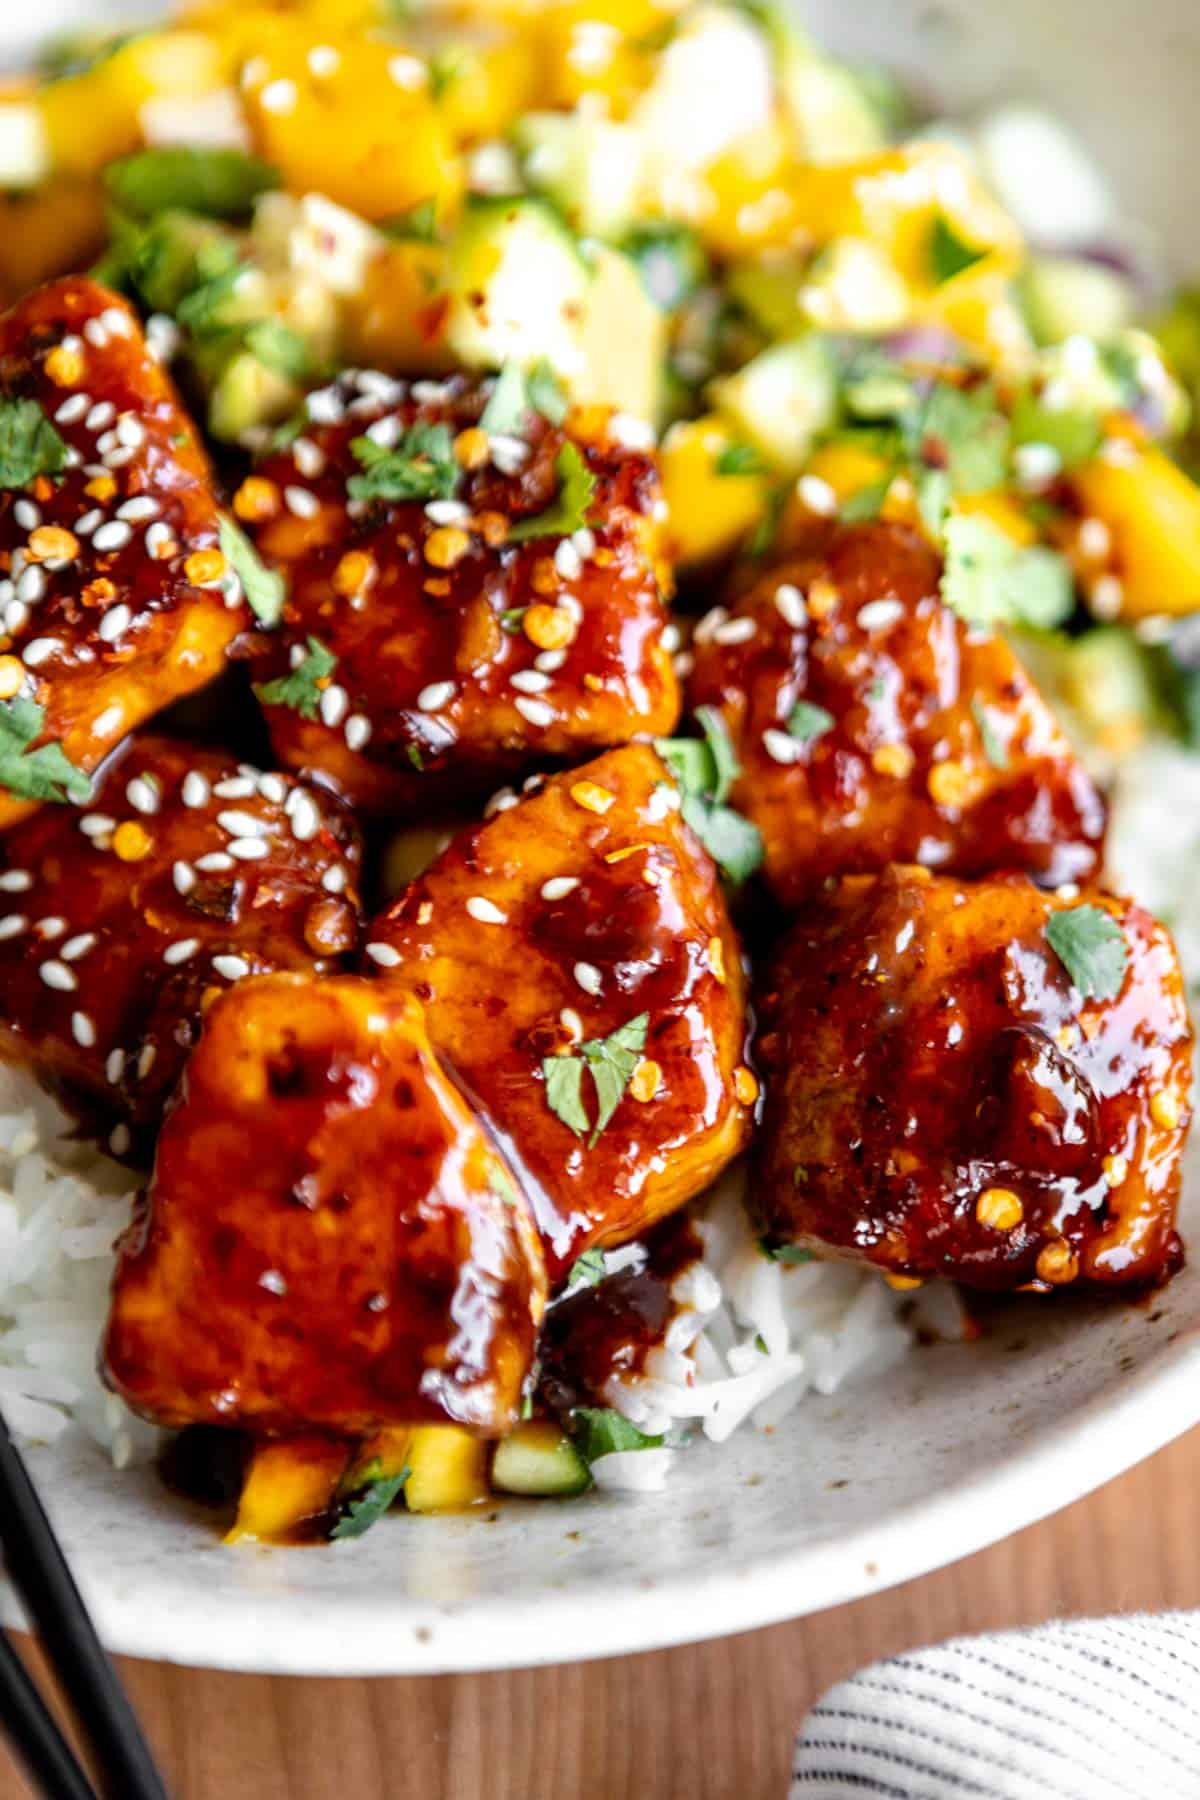 angled view of the salmon bites with rice and ginger sauce